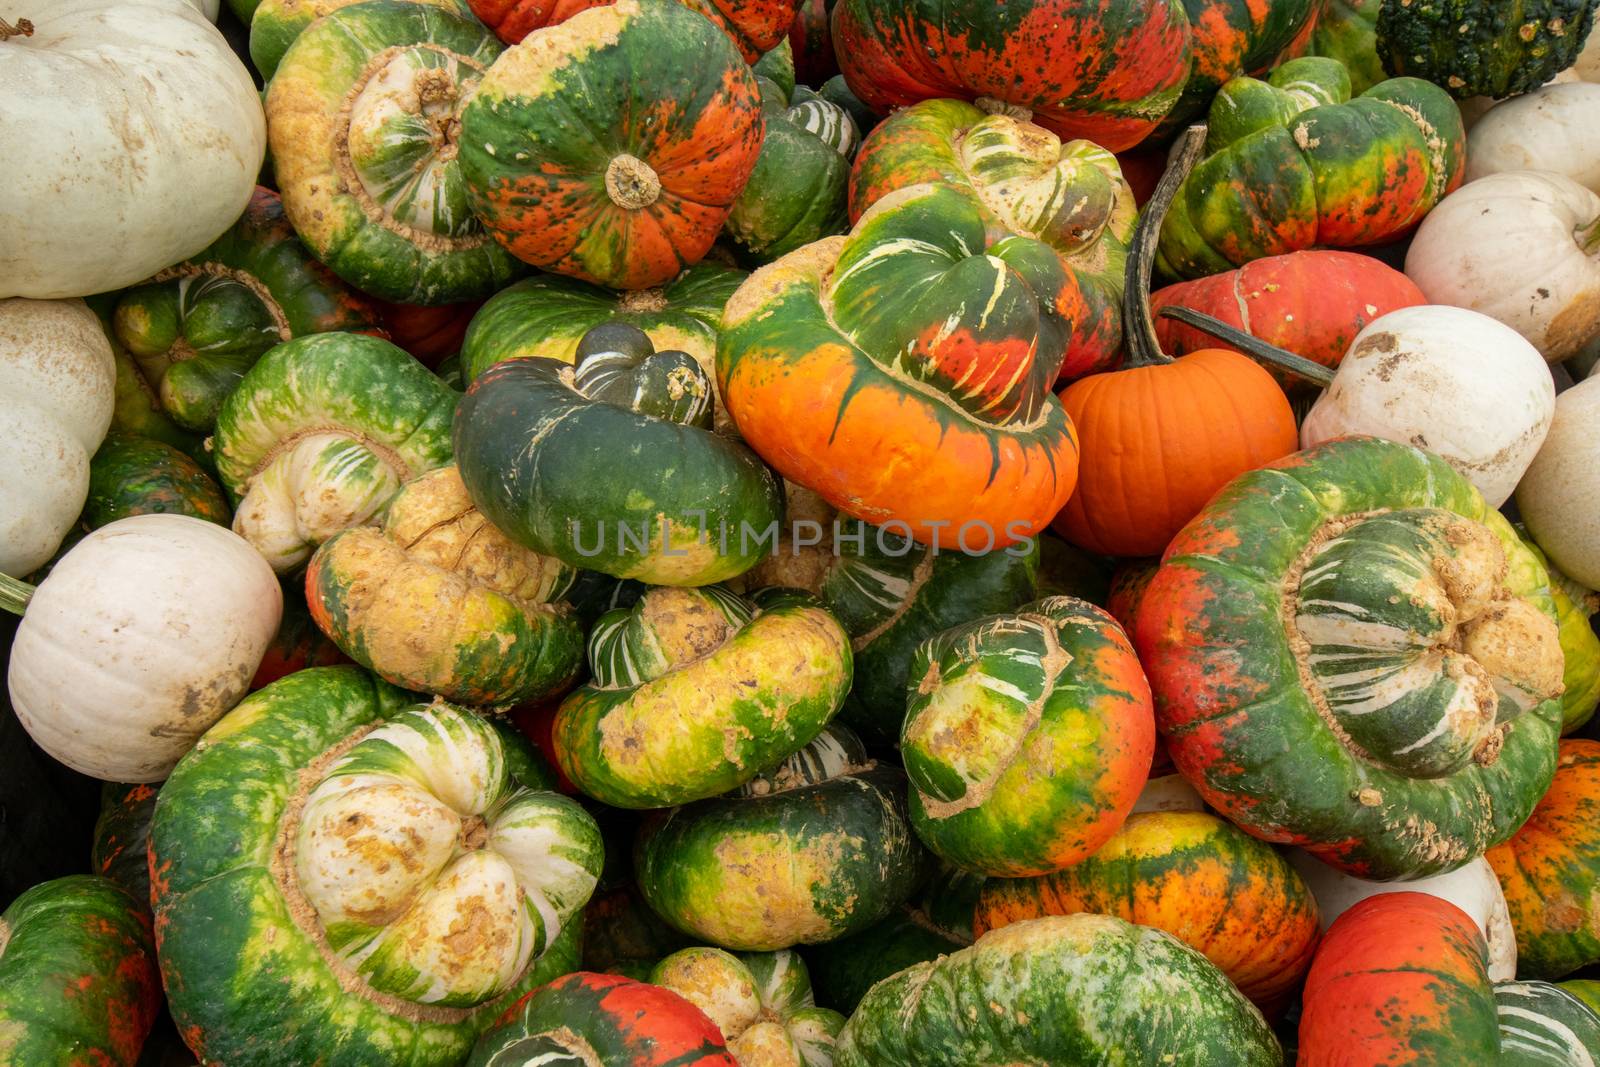 Ugly Pumpkins in a Pile Filling the Frame by bju12290